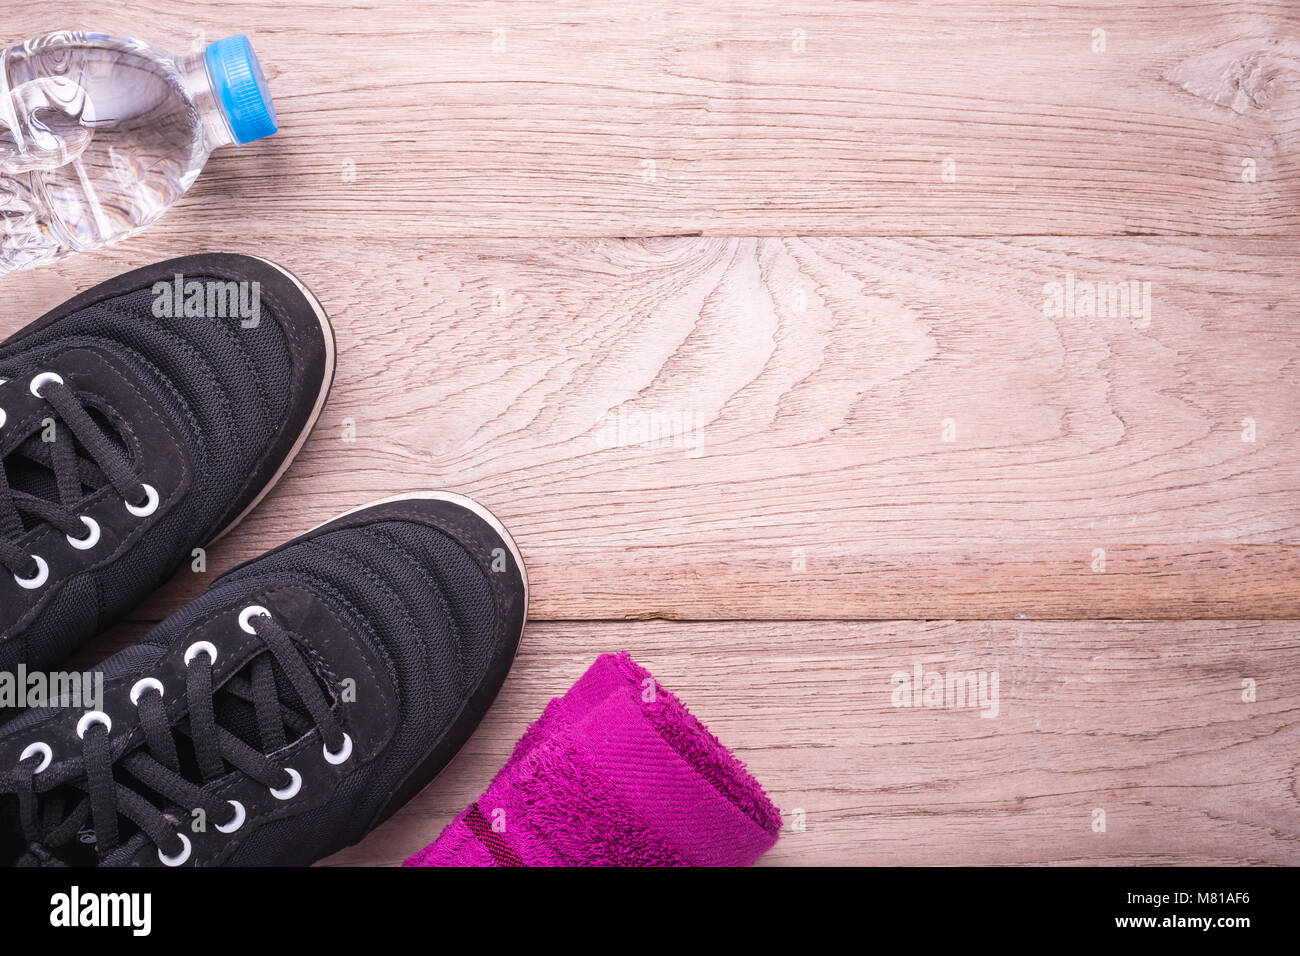 Black Running / Sneaker shoe, water bottle and towel on brown wooden floor. Exercise concept. Top view Stock Photo